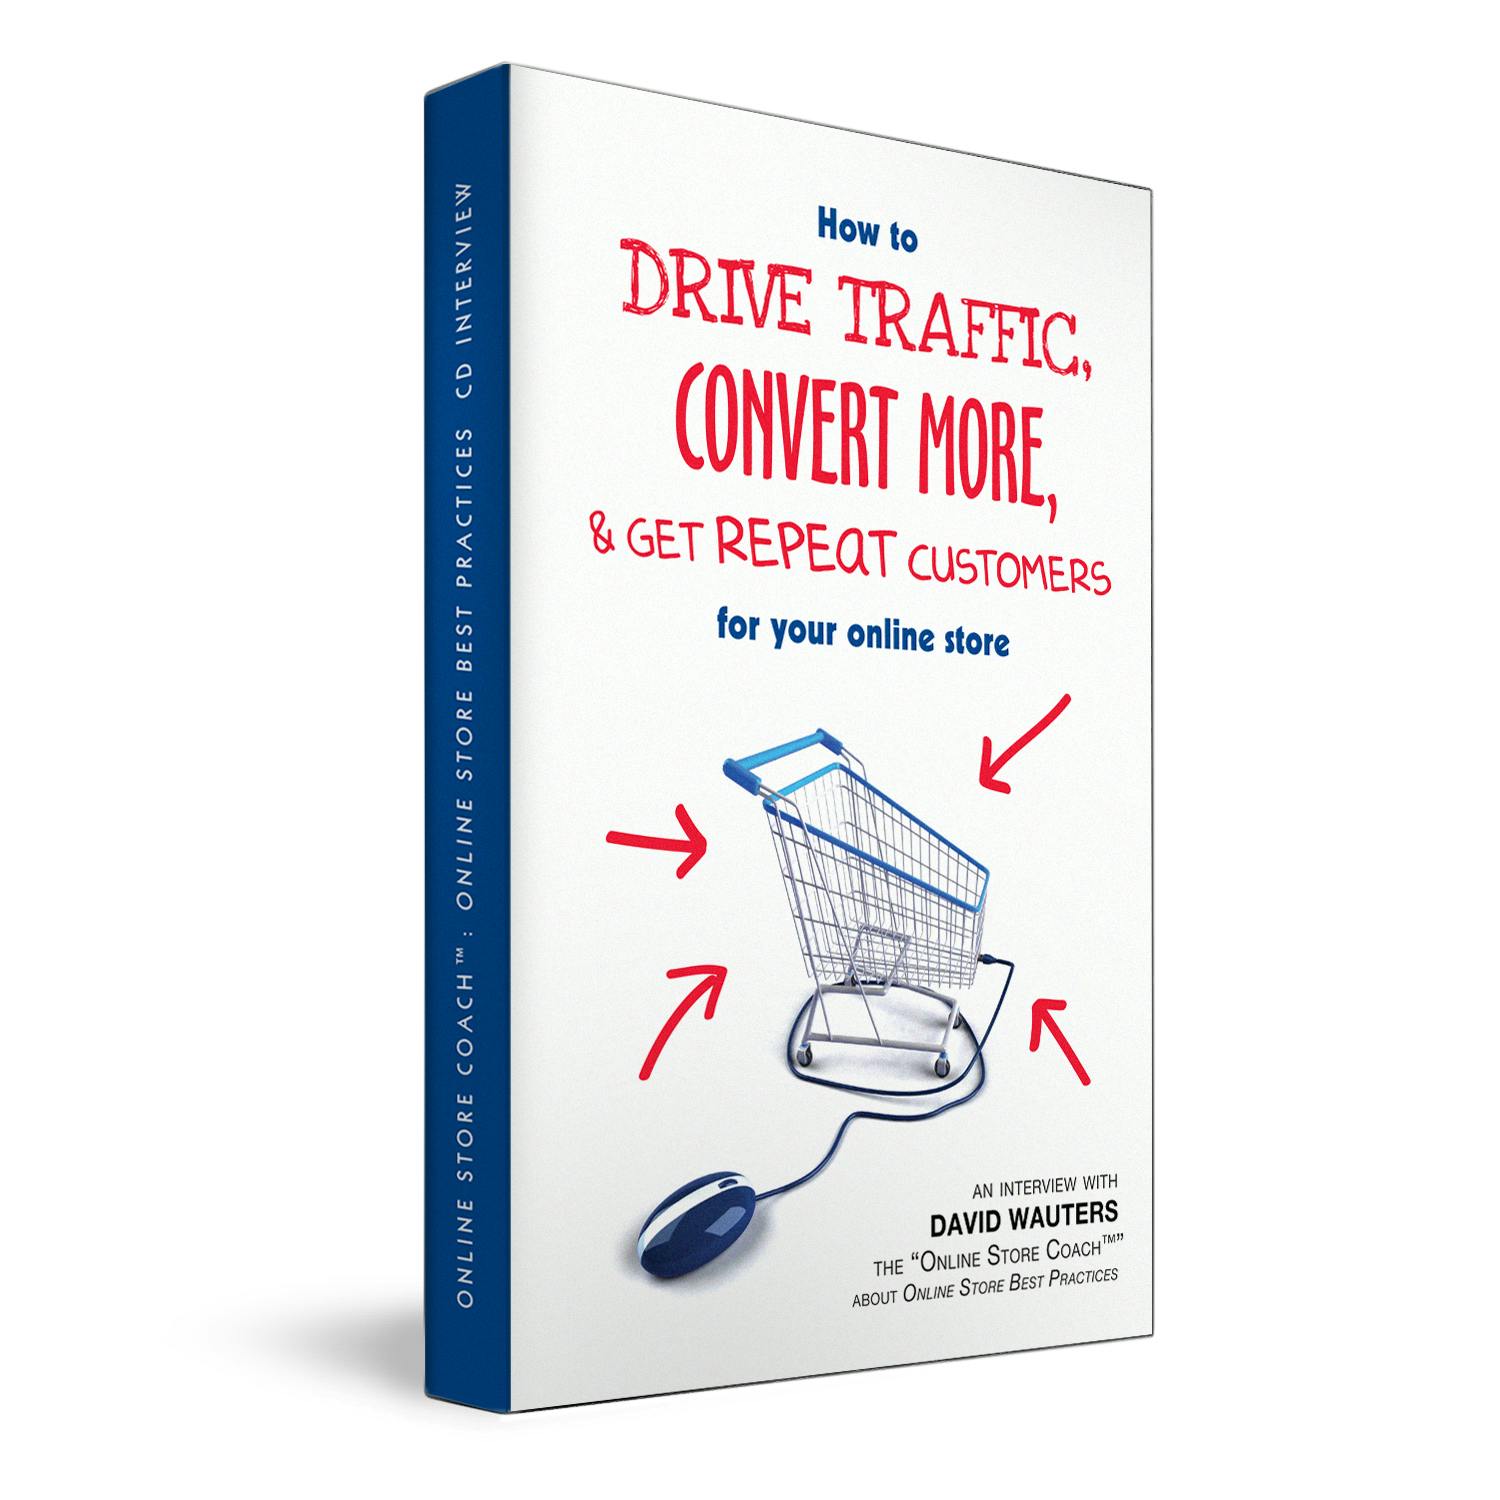 HOW TO DRIVE TRAFFIC, CONVERT MORE, & GET REPEAT CUSTOMERS FOR YOUR ONLINE STORE